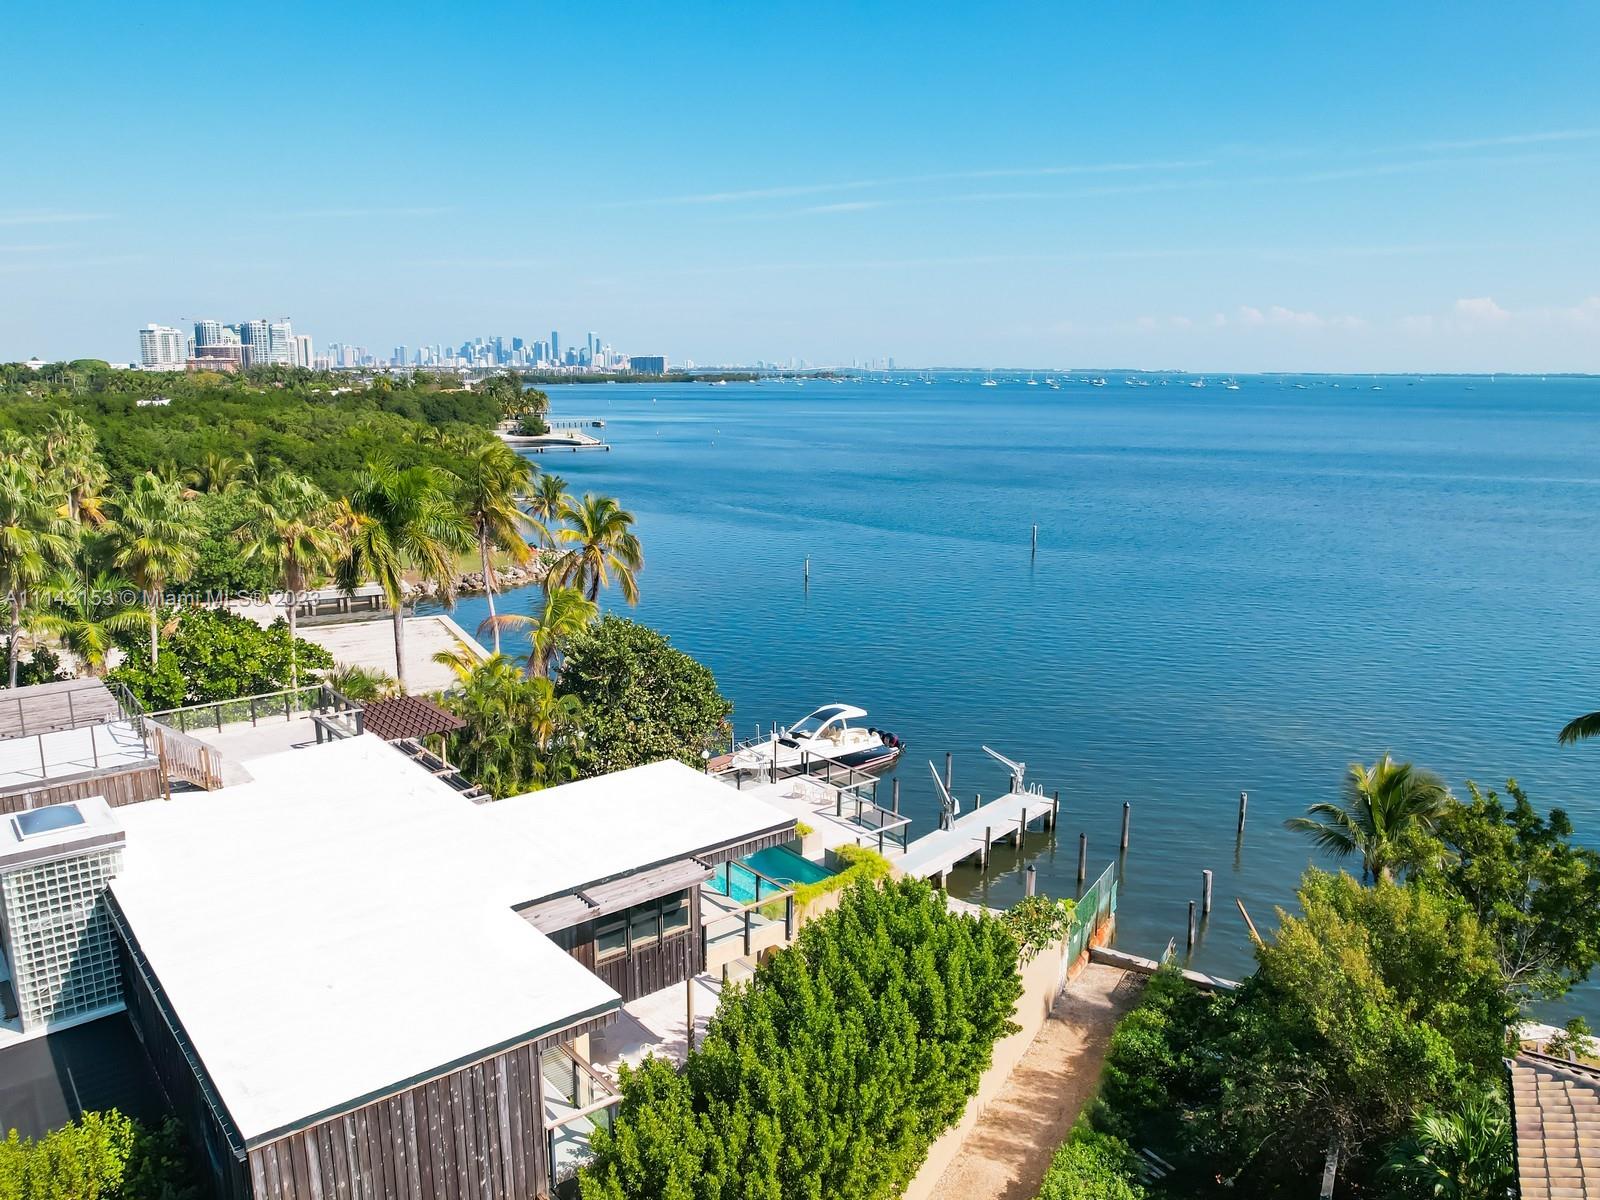 Magnificent wide direct bay view.    Main level is approx., 17 feet above sea level which creates some of Miami's best views from a single family home. Multi level living with glorious ocean, bay and city views are breathtaking. One of Coconut Grove’s most charming streets lead up to the private compound.Four bedrooms plus two offices, 5 1/2 baths, great room open concept, huge entertainment deck that allows great indoor outdoor spaces, new dock that can handle up to a 30 foot boat with approx. 4 feet of draft at low tide. Live the very special Coconut Grove lifestyle on Biscayne Bay.